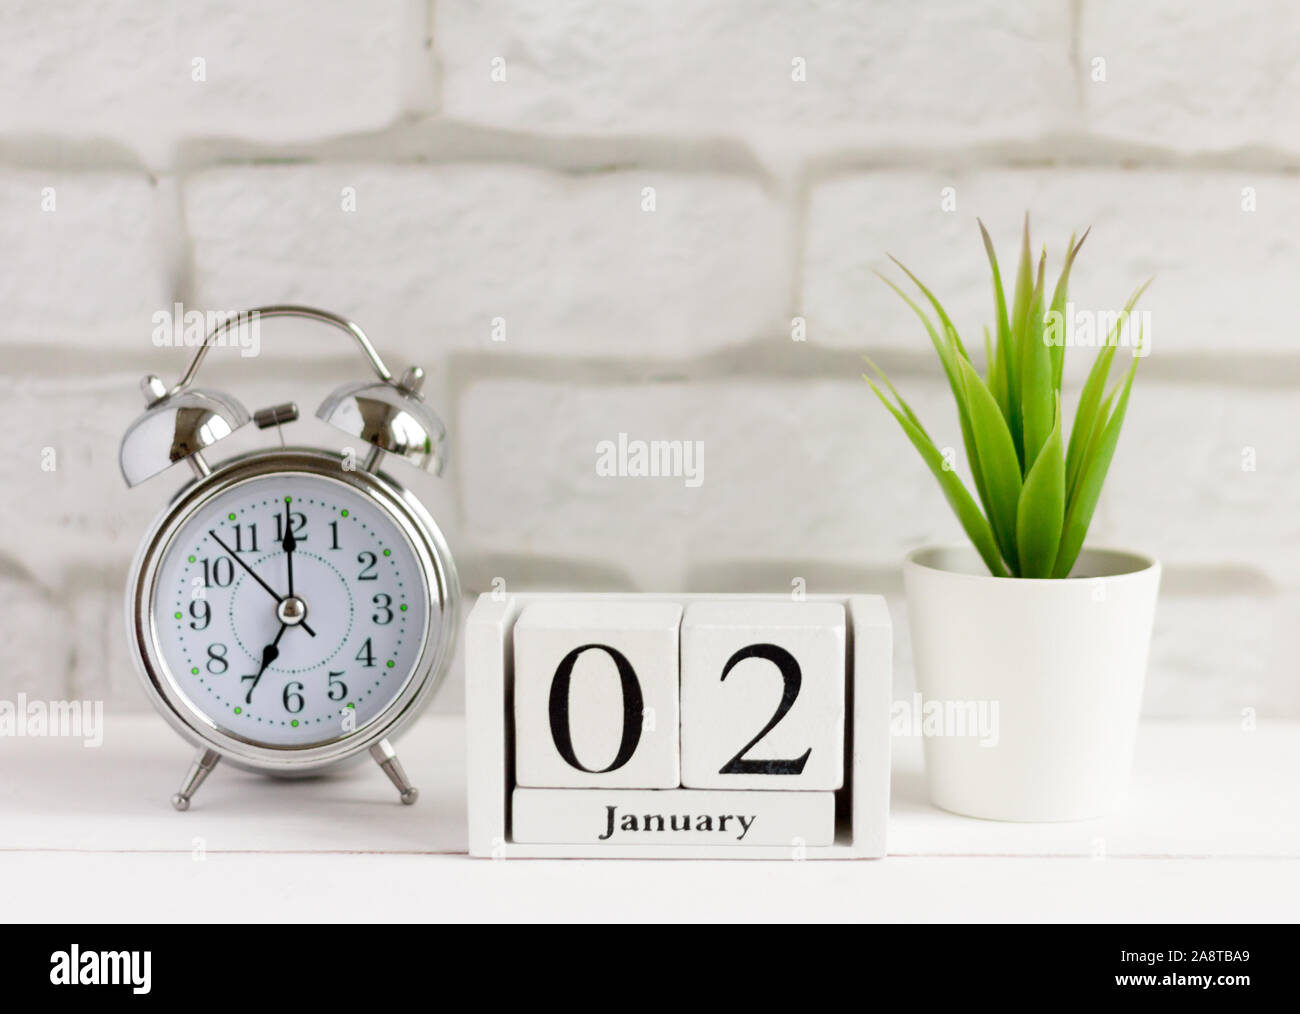 January 2 on the wooden calendar, the beginning of a new day and year Stock Photo